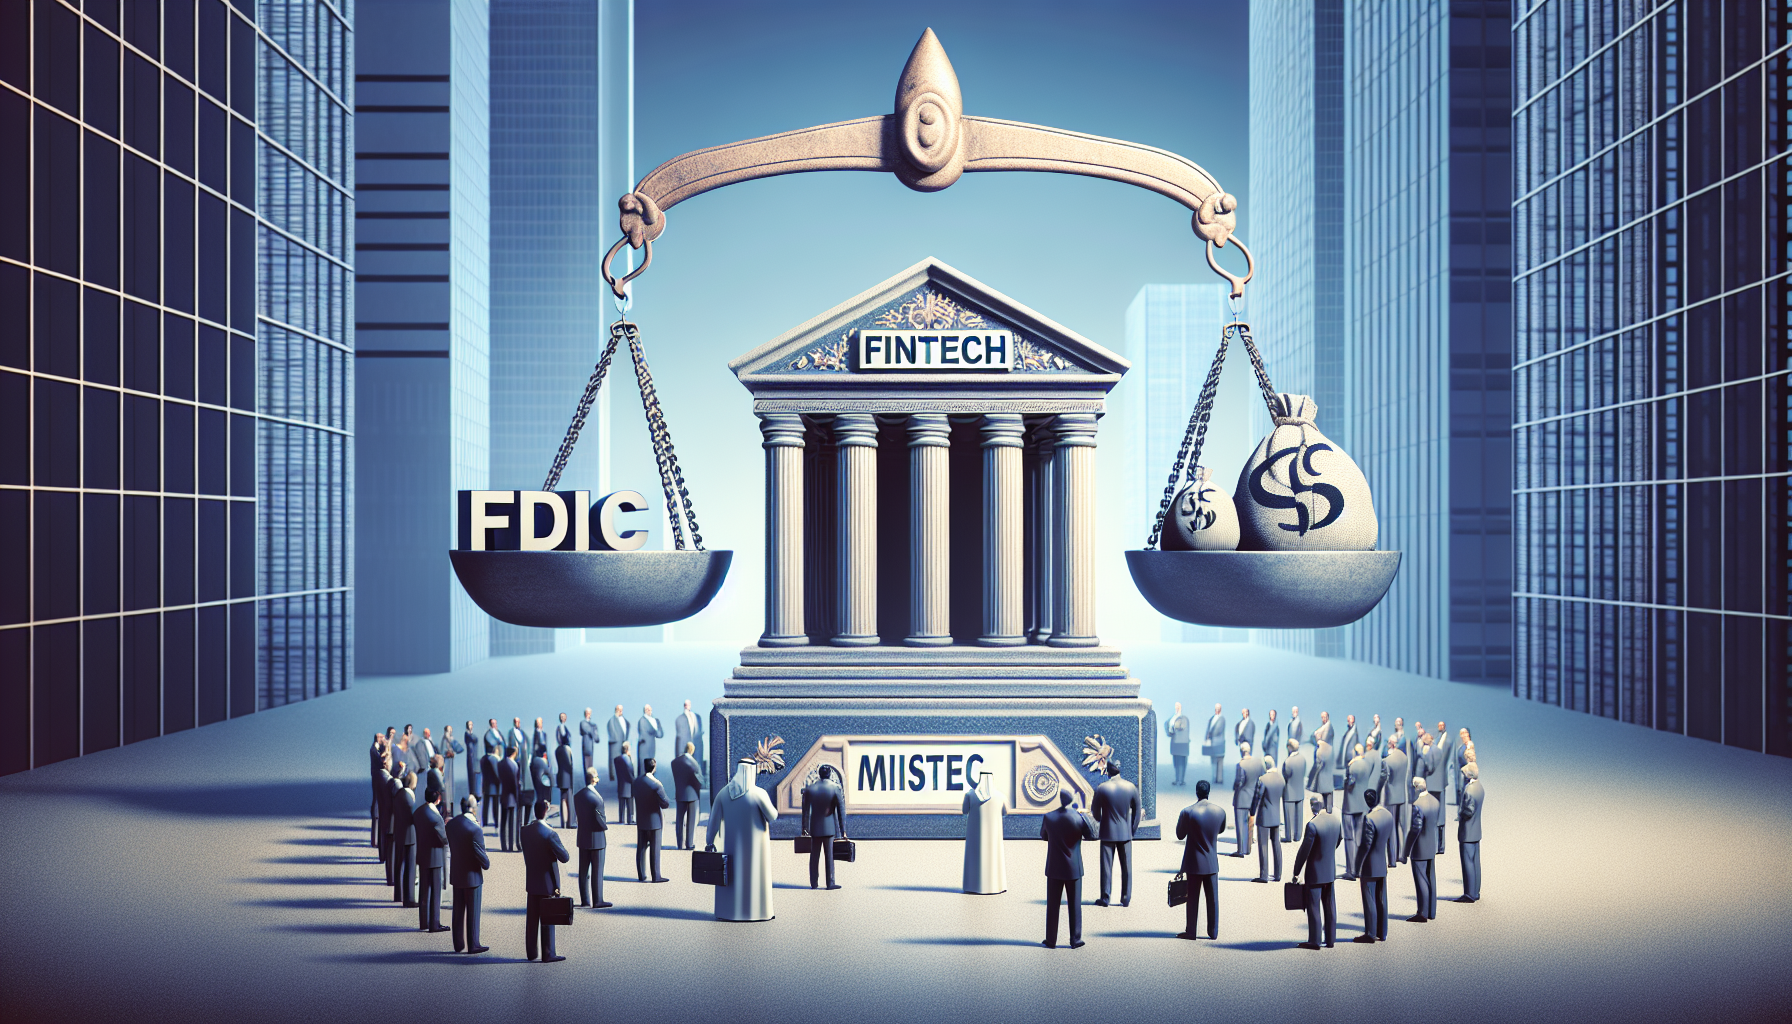 Synapse fintech's FDIC misrepresentation: lessons for investors and implications for the fintech industry